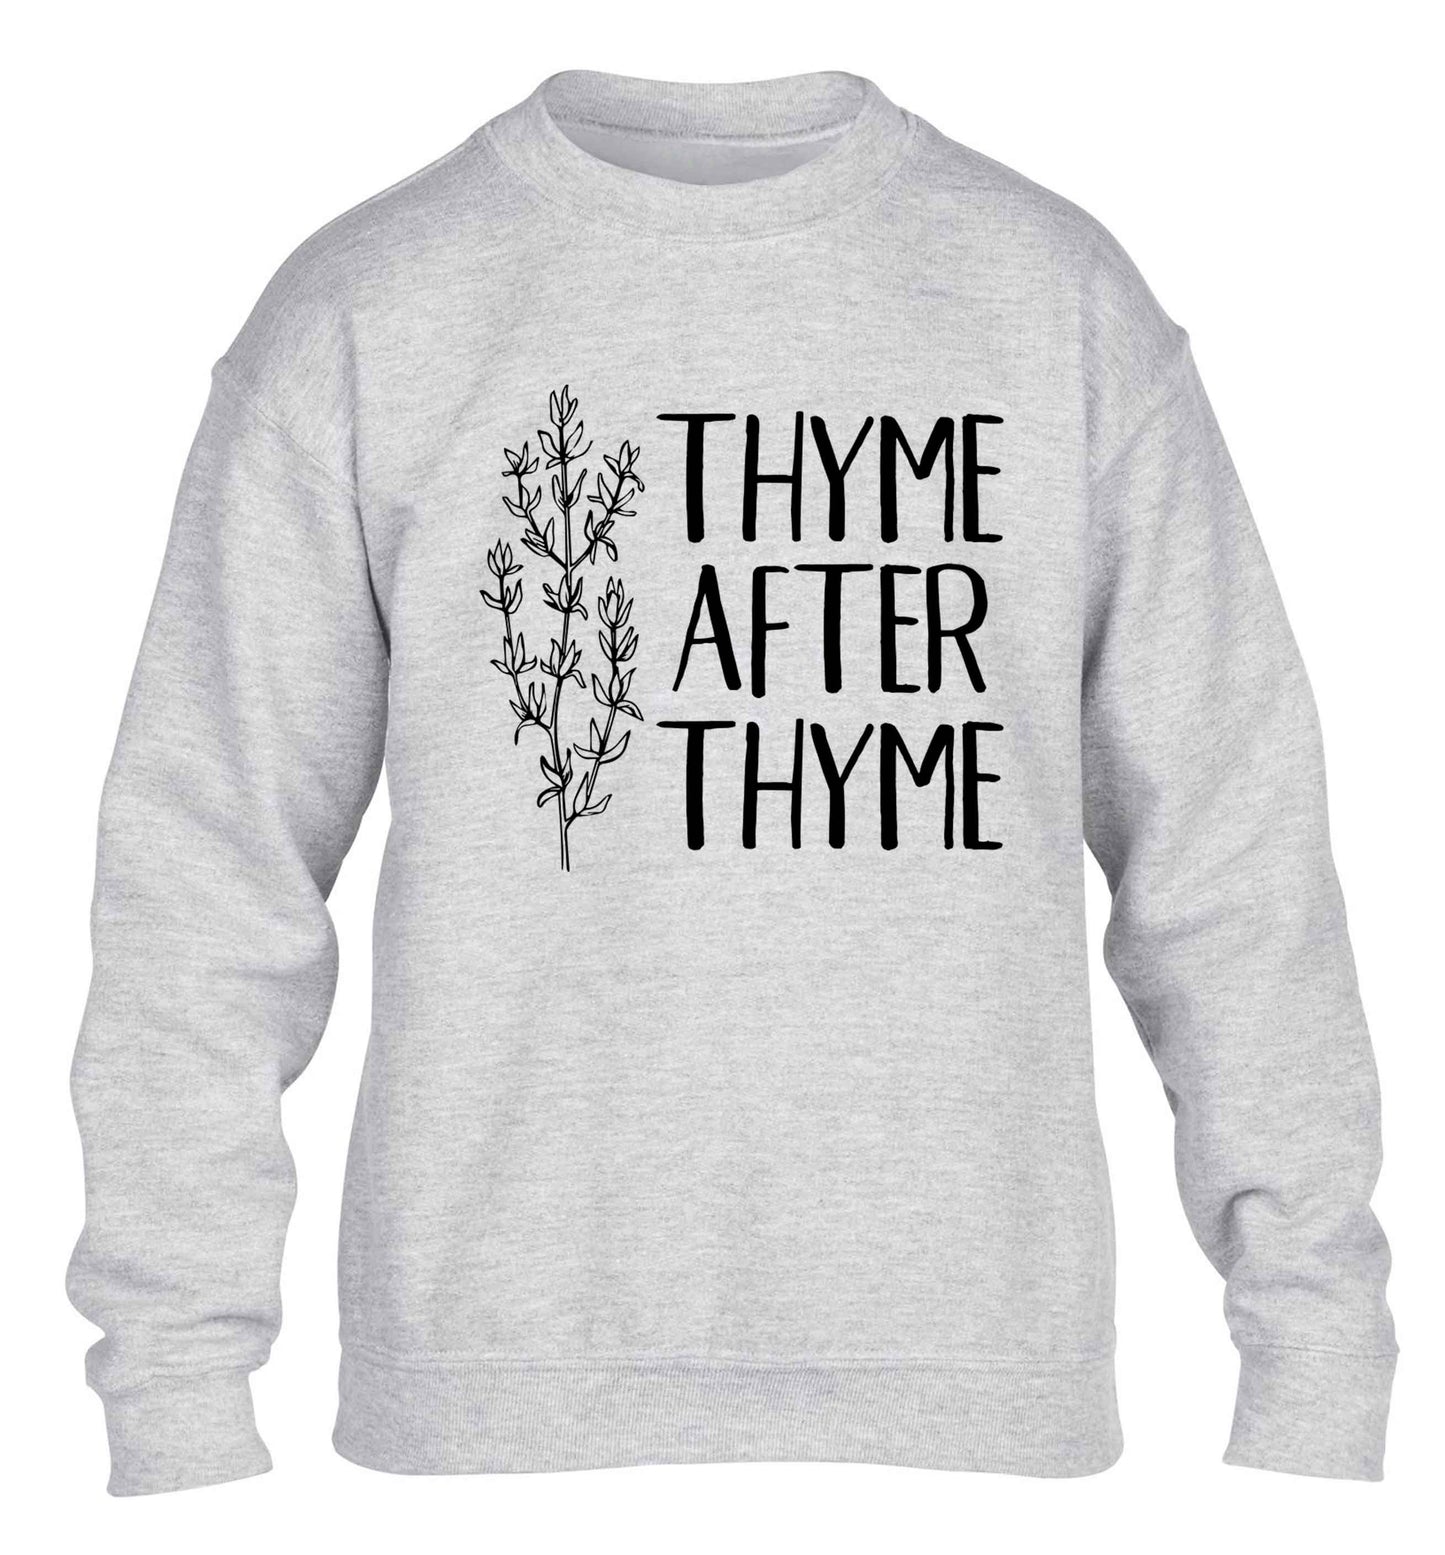 Thyme after thyme children's grey sweater 12-13 Years